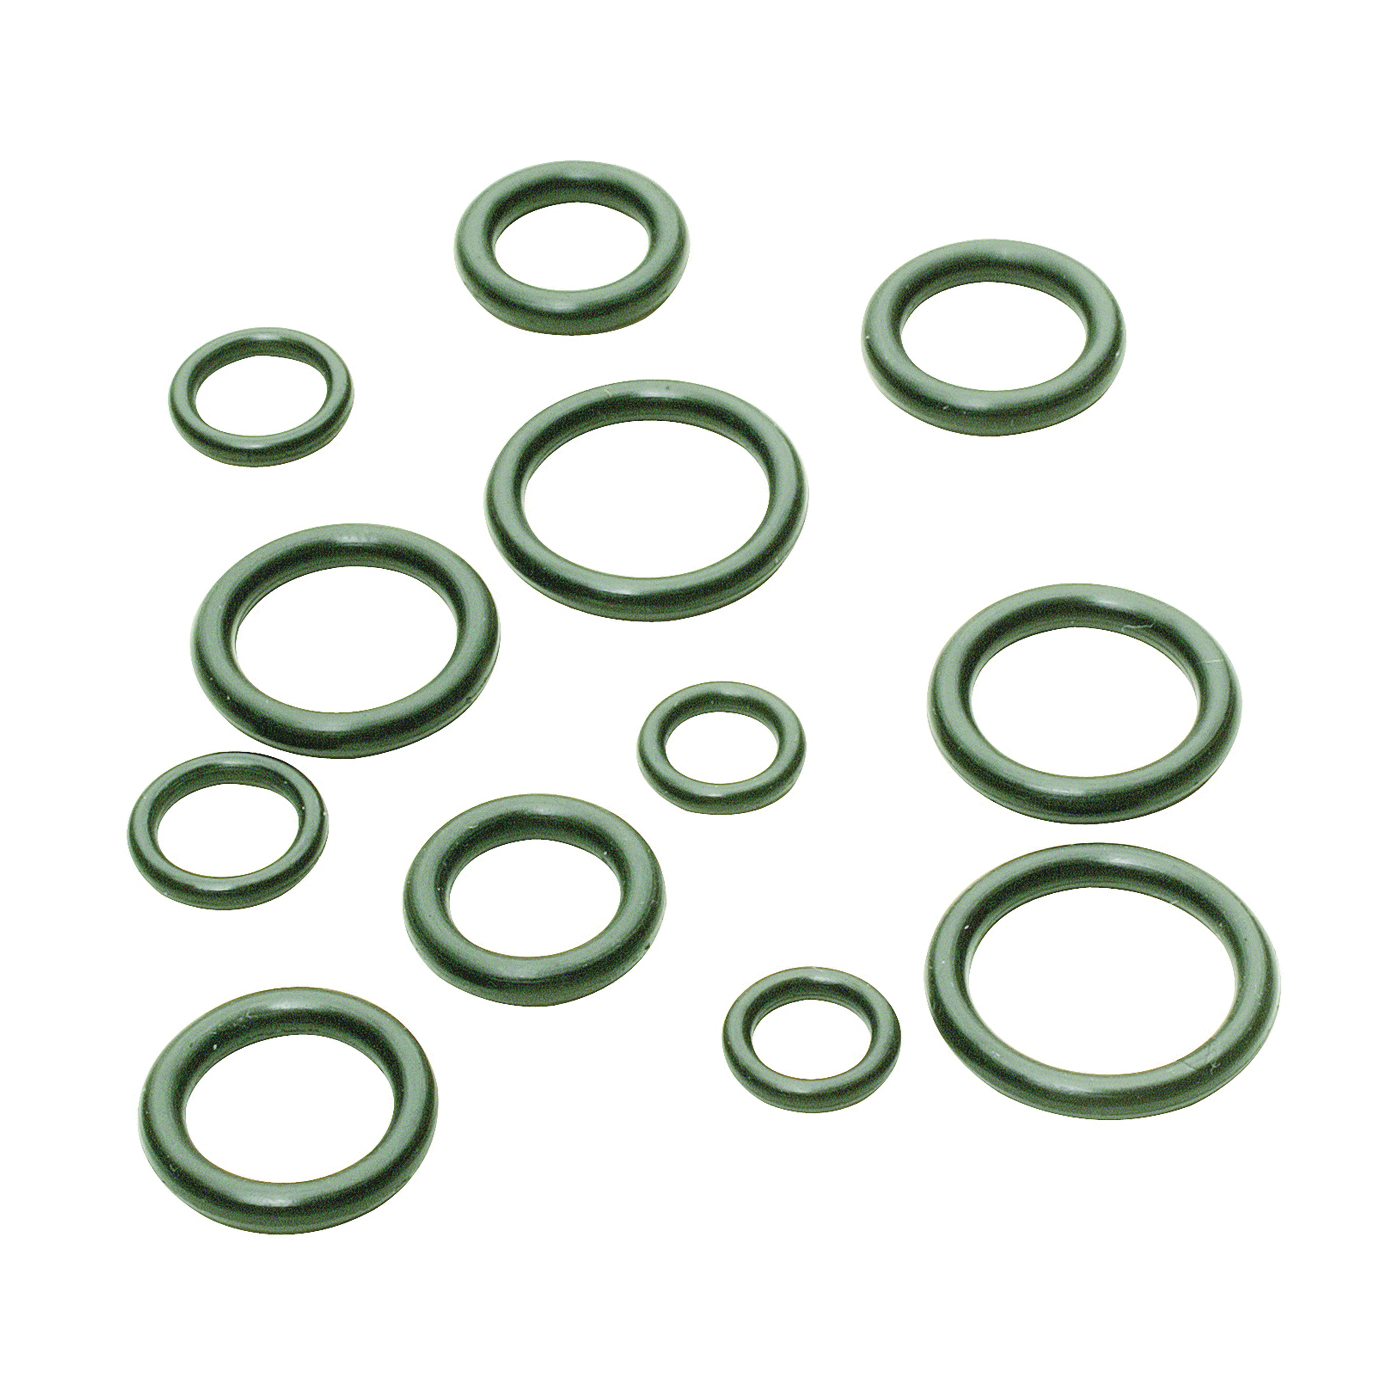 PP810-1 O-Ring Assortment, For: Sink and Faucet Handles